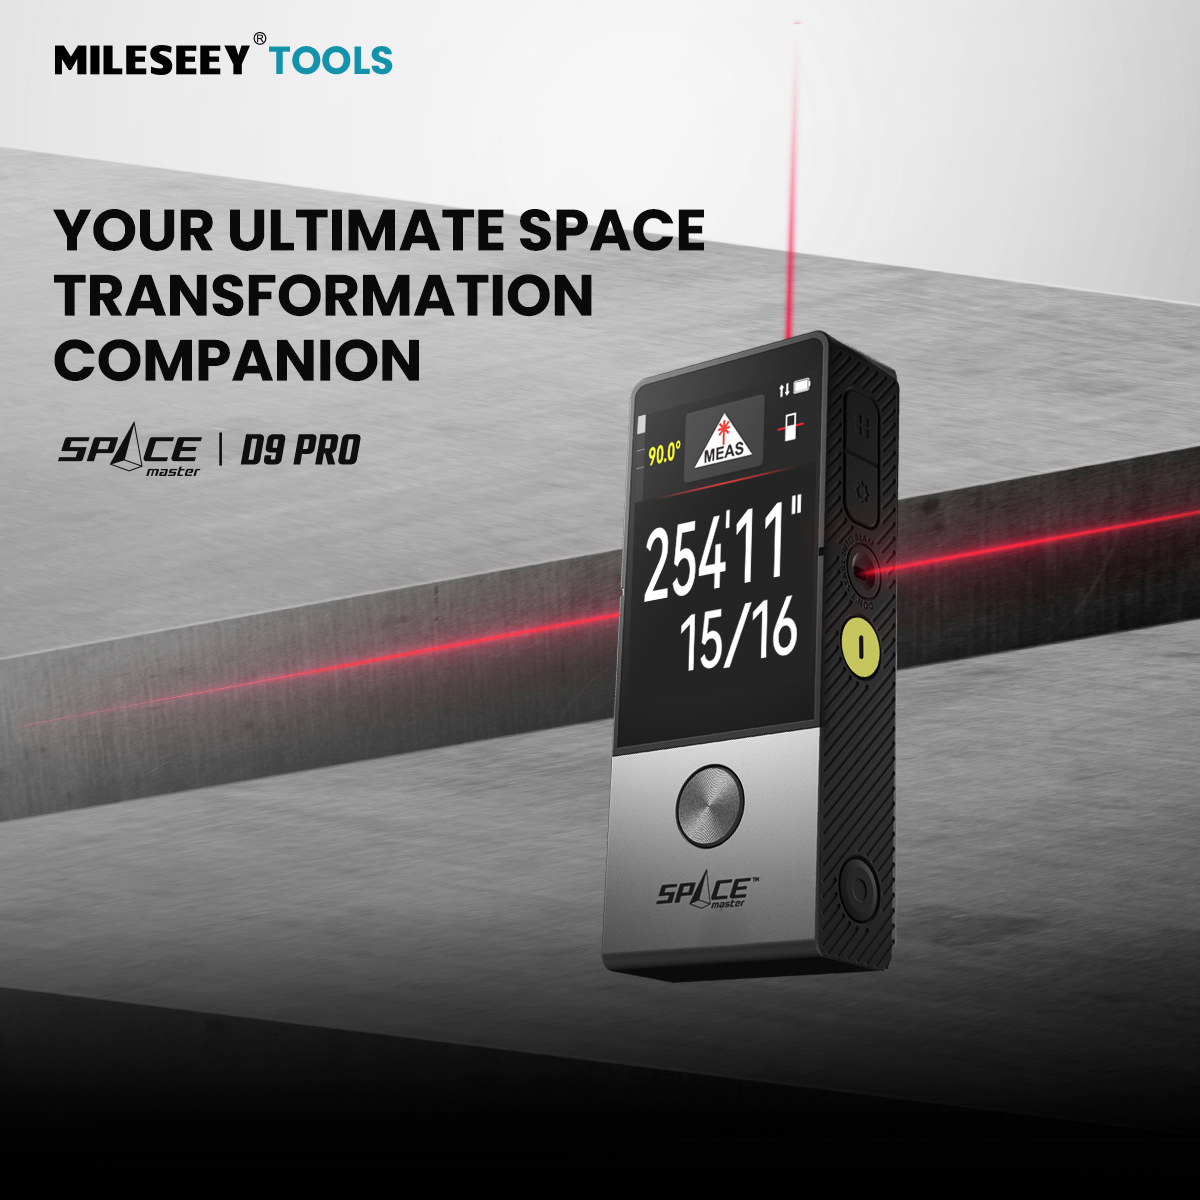 Mileseey D9 Pro Laser Measure Space Master